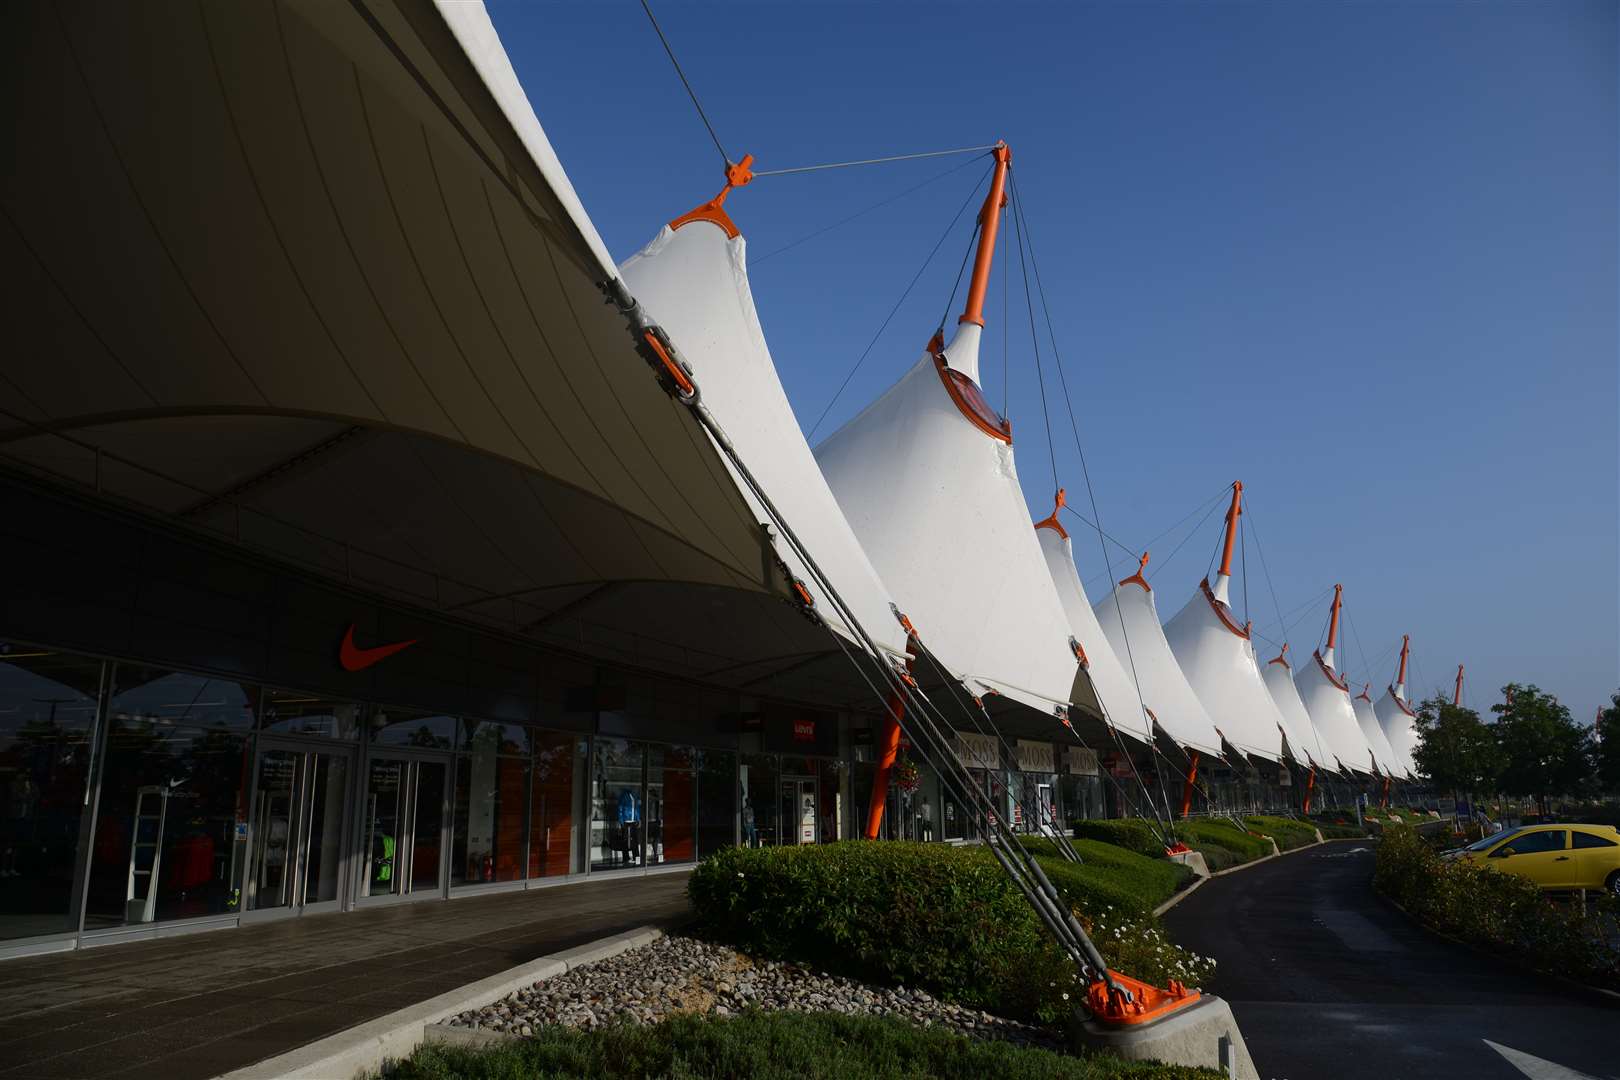 The Ashford Designer Outlet will be extended